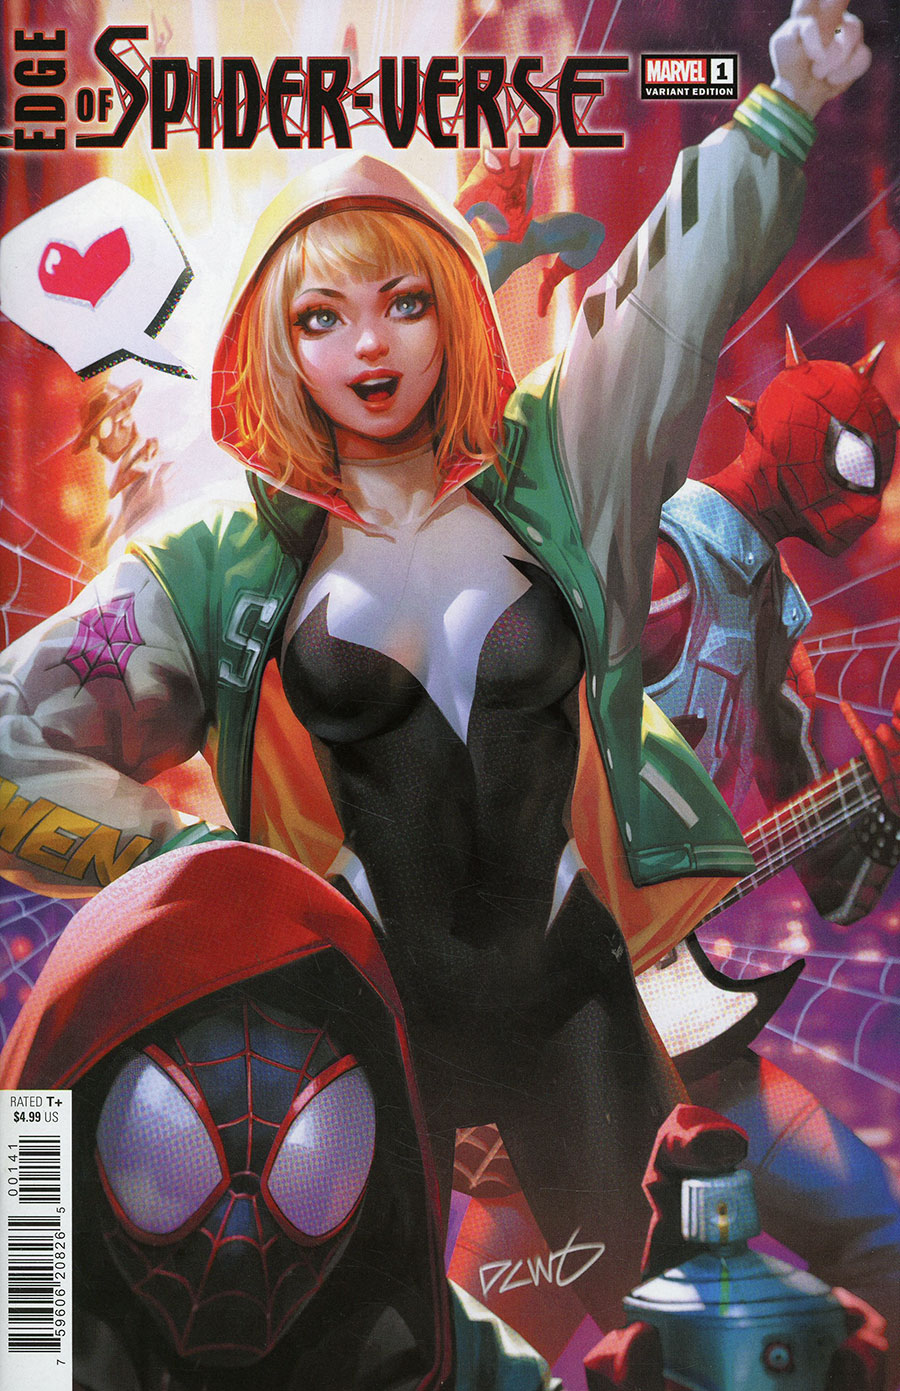 Edge Of Spider-Verse Vol 4 #1 Cover E Variant Derrick Chew Spider-Gwen Cover